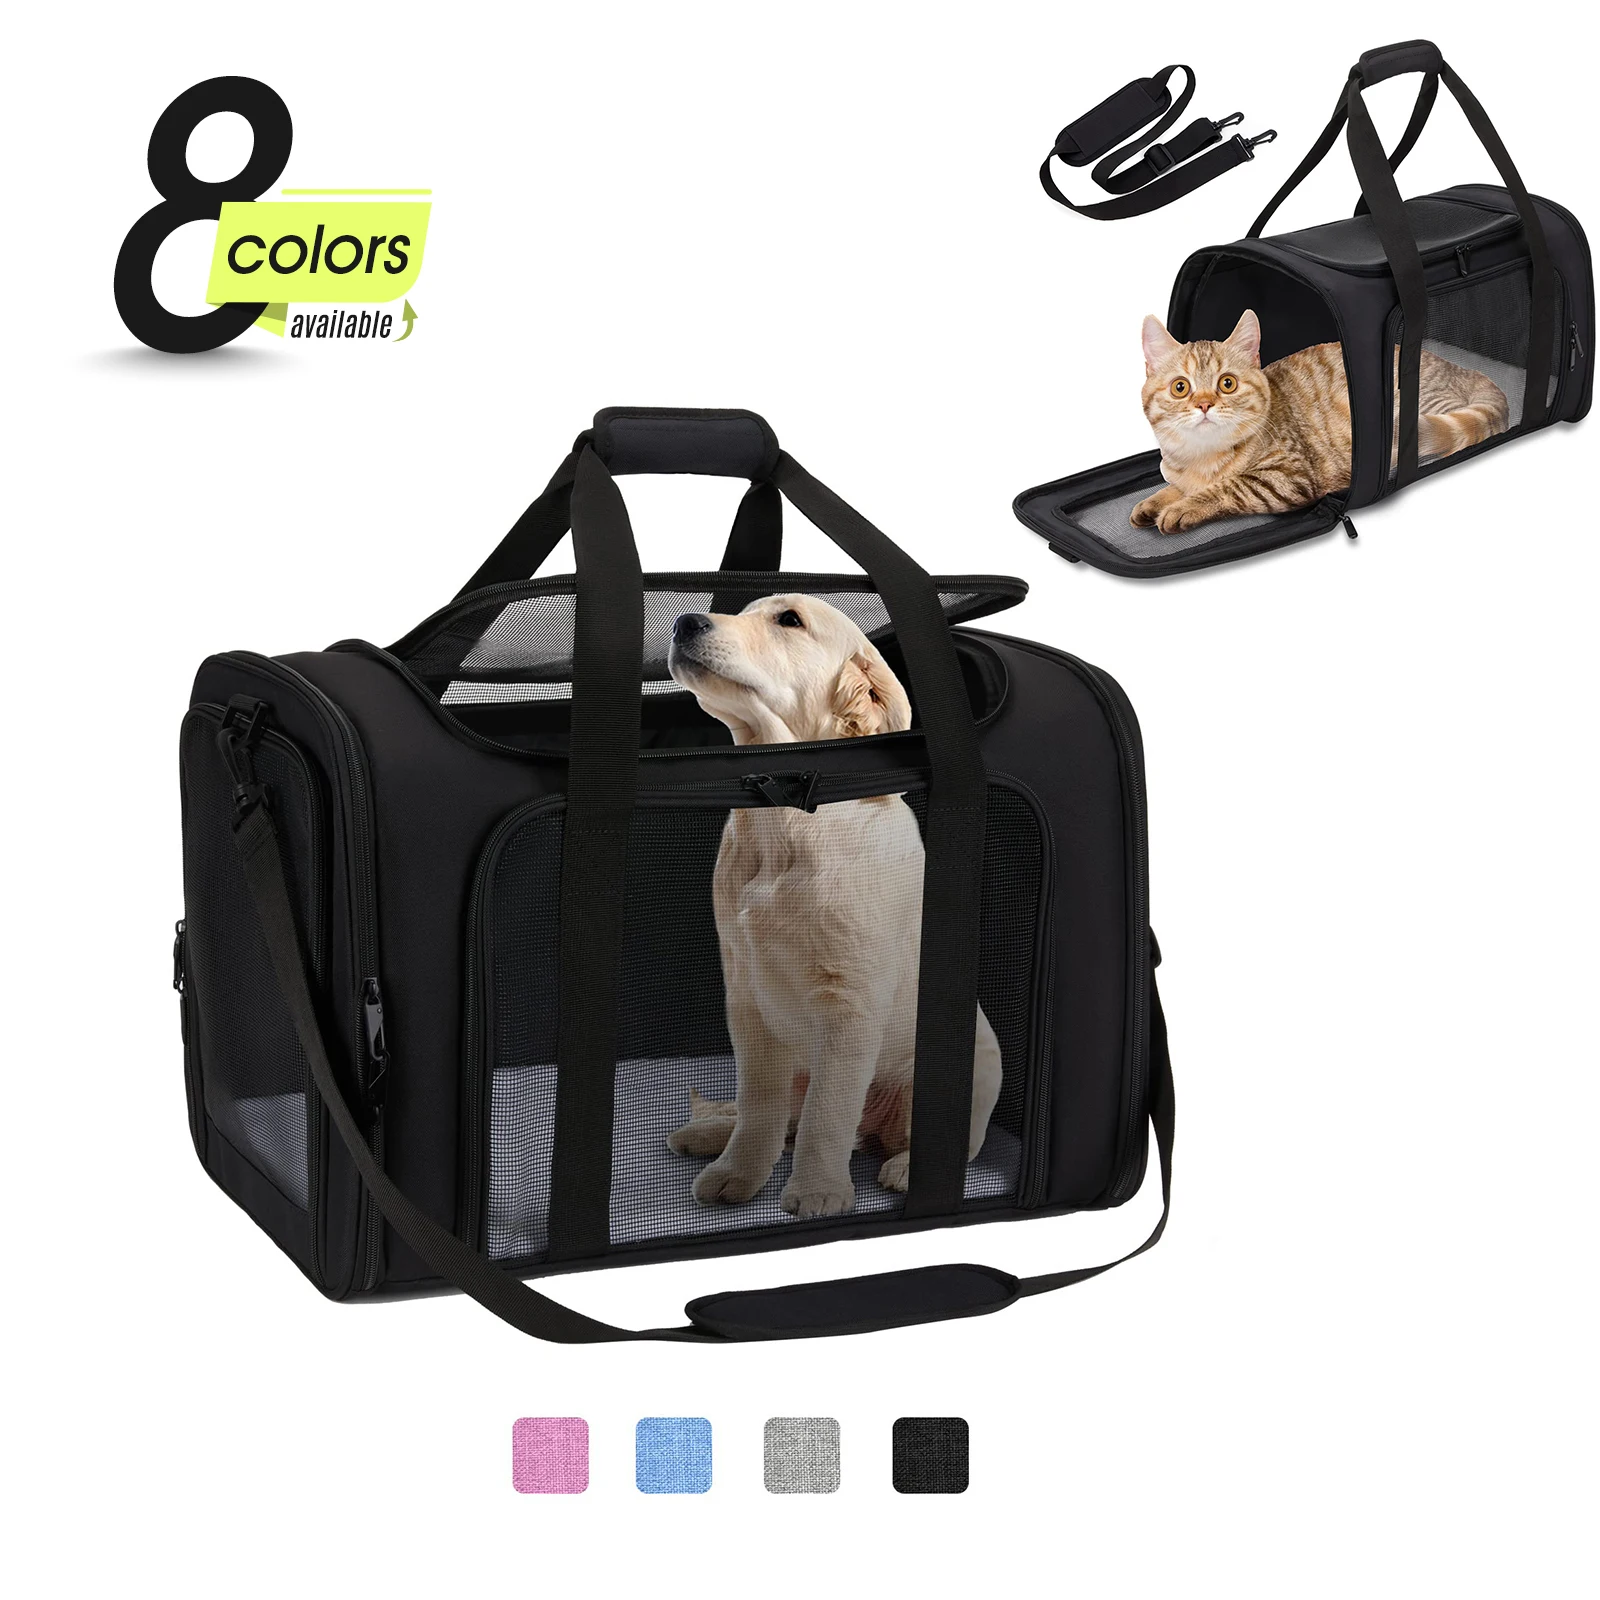 

Cat Carriers Dog Carrier Pet Carrier for Small Medium Cats Dogs Puppies up to 15 Lbs